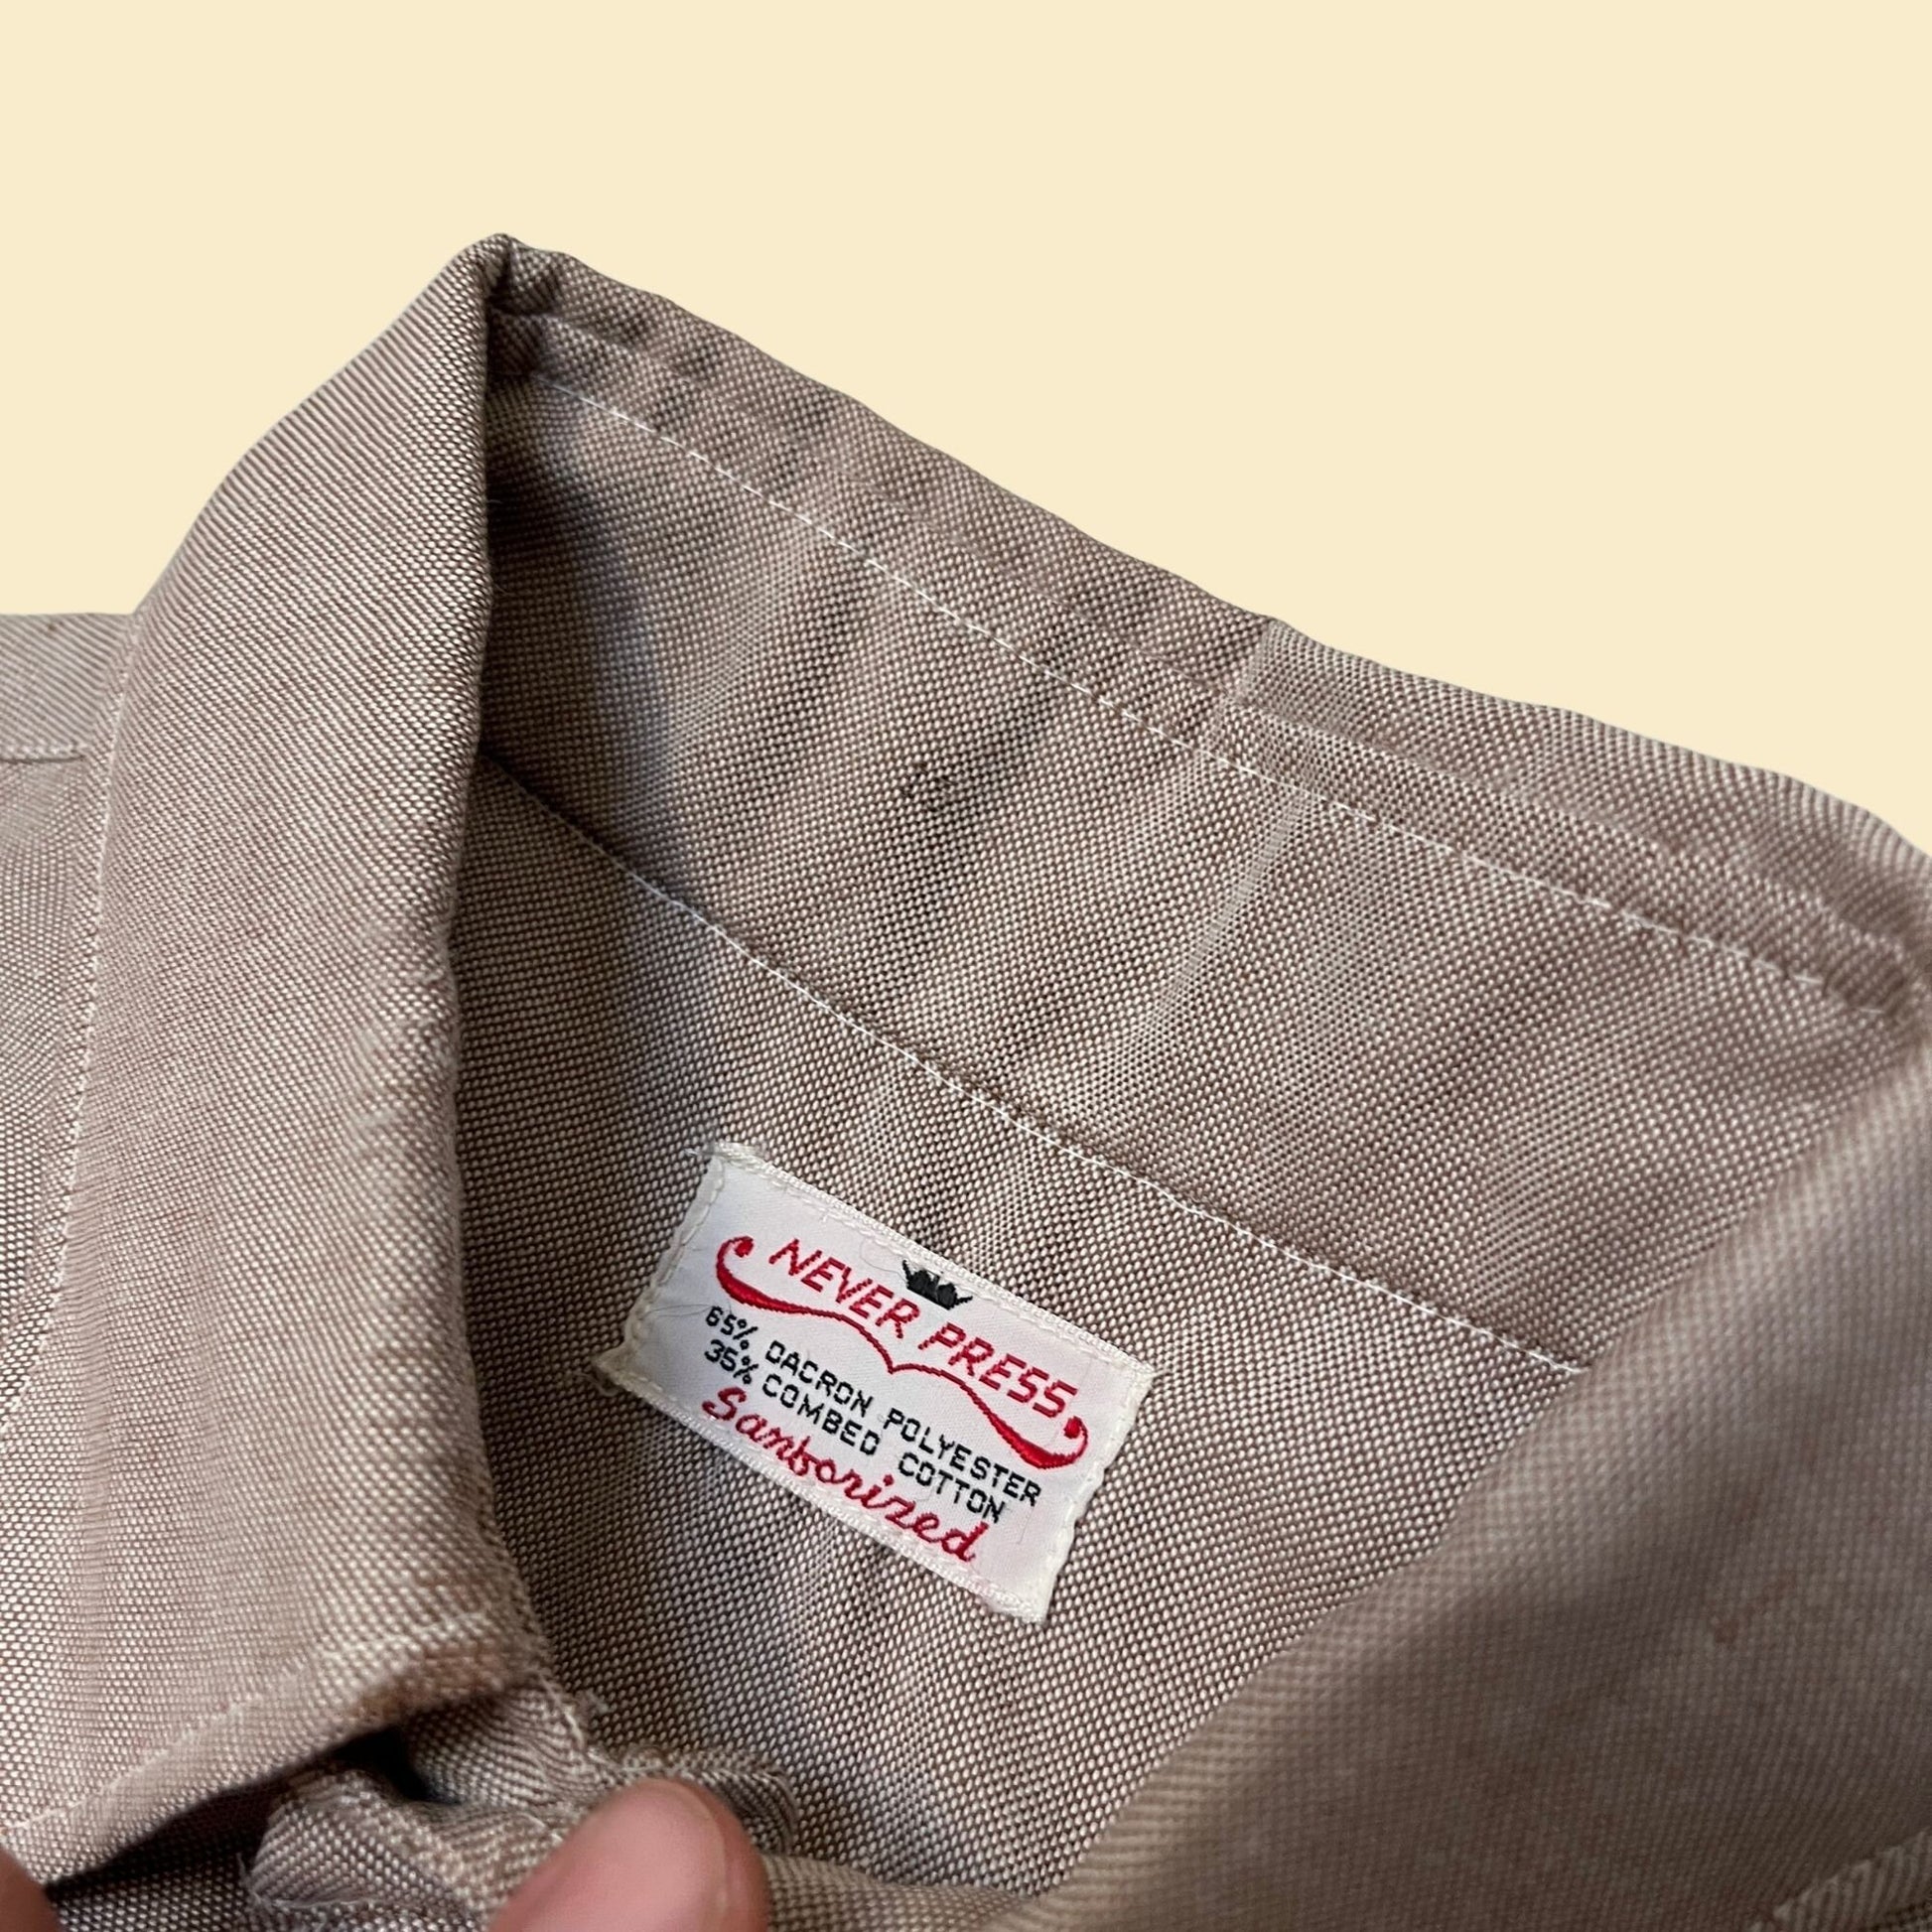 70s men's casual shirt by Never Pressed, Sanforized, vintage short sleeve workwear button down in light brown